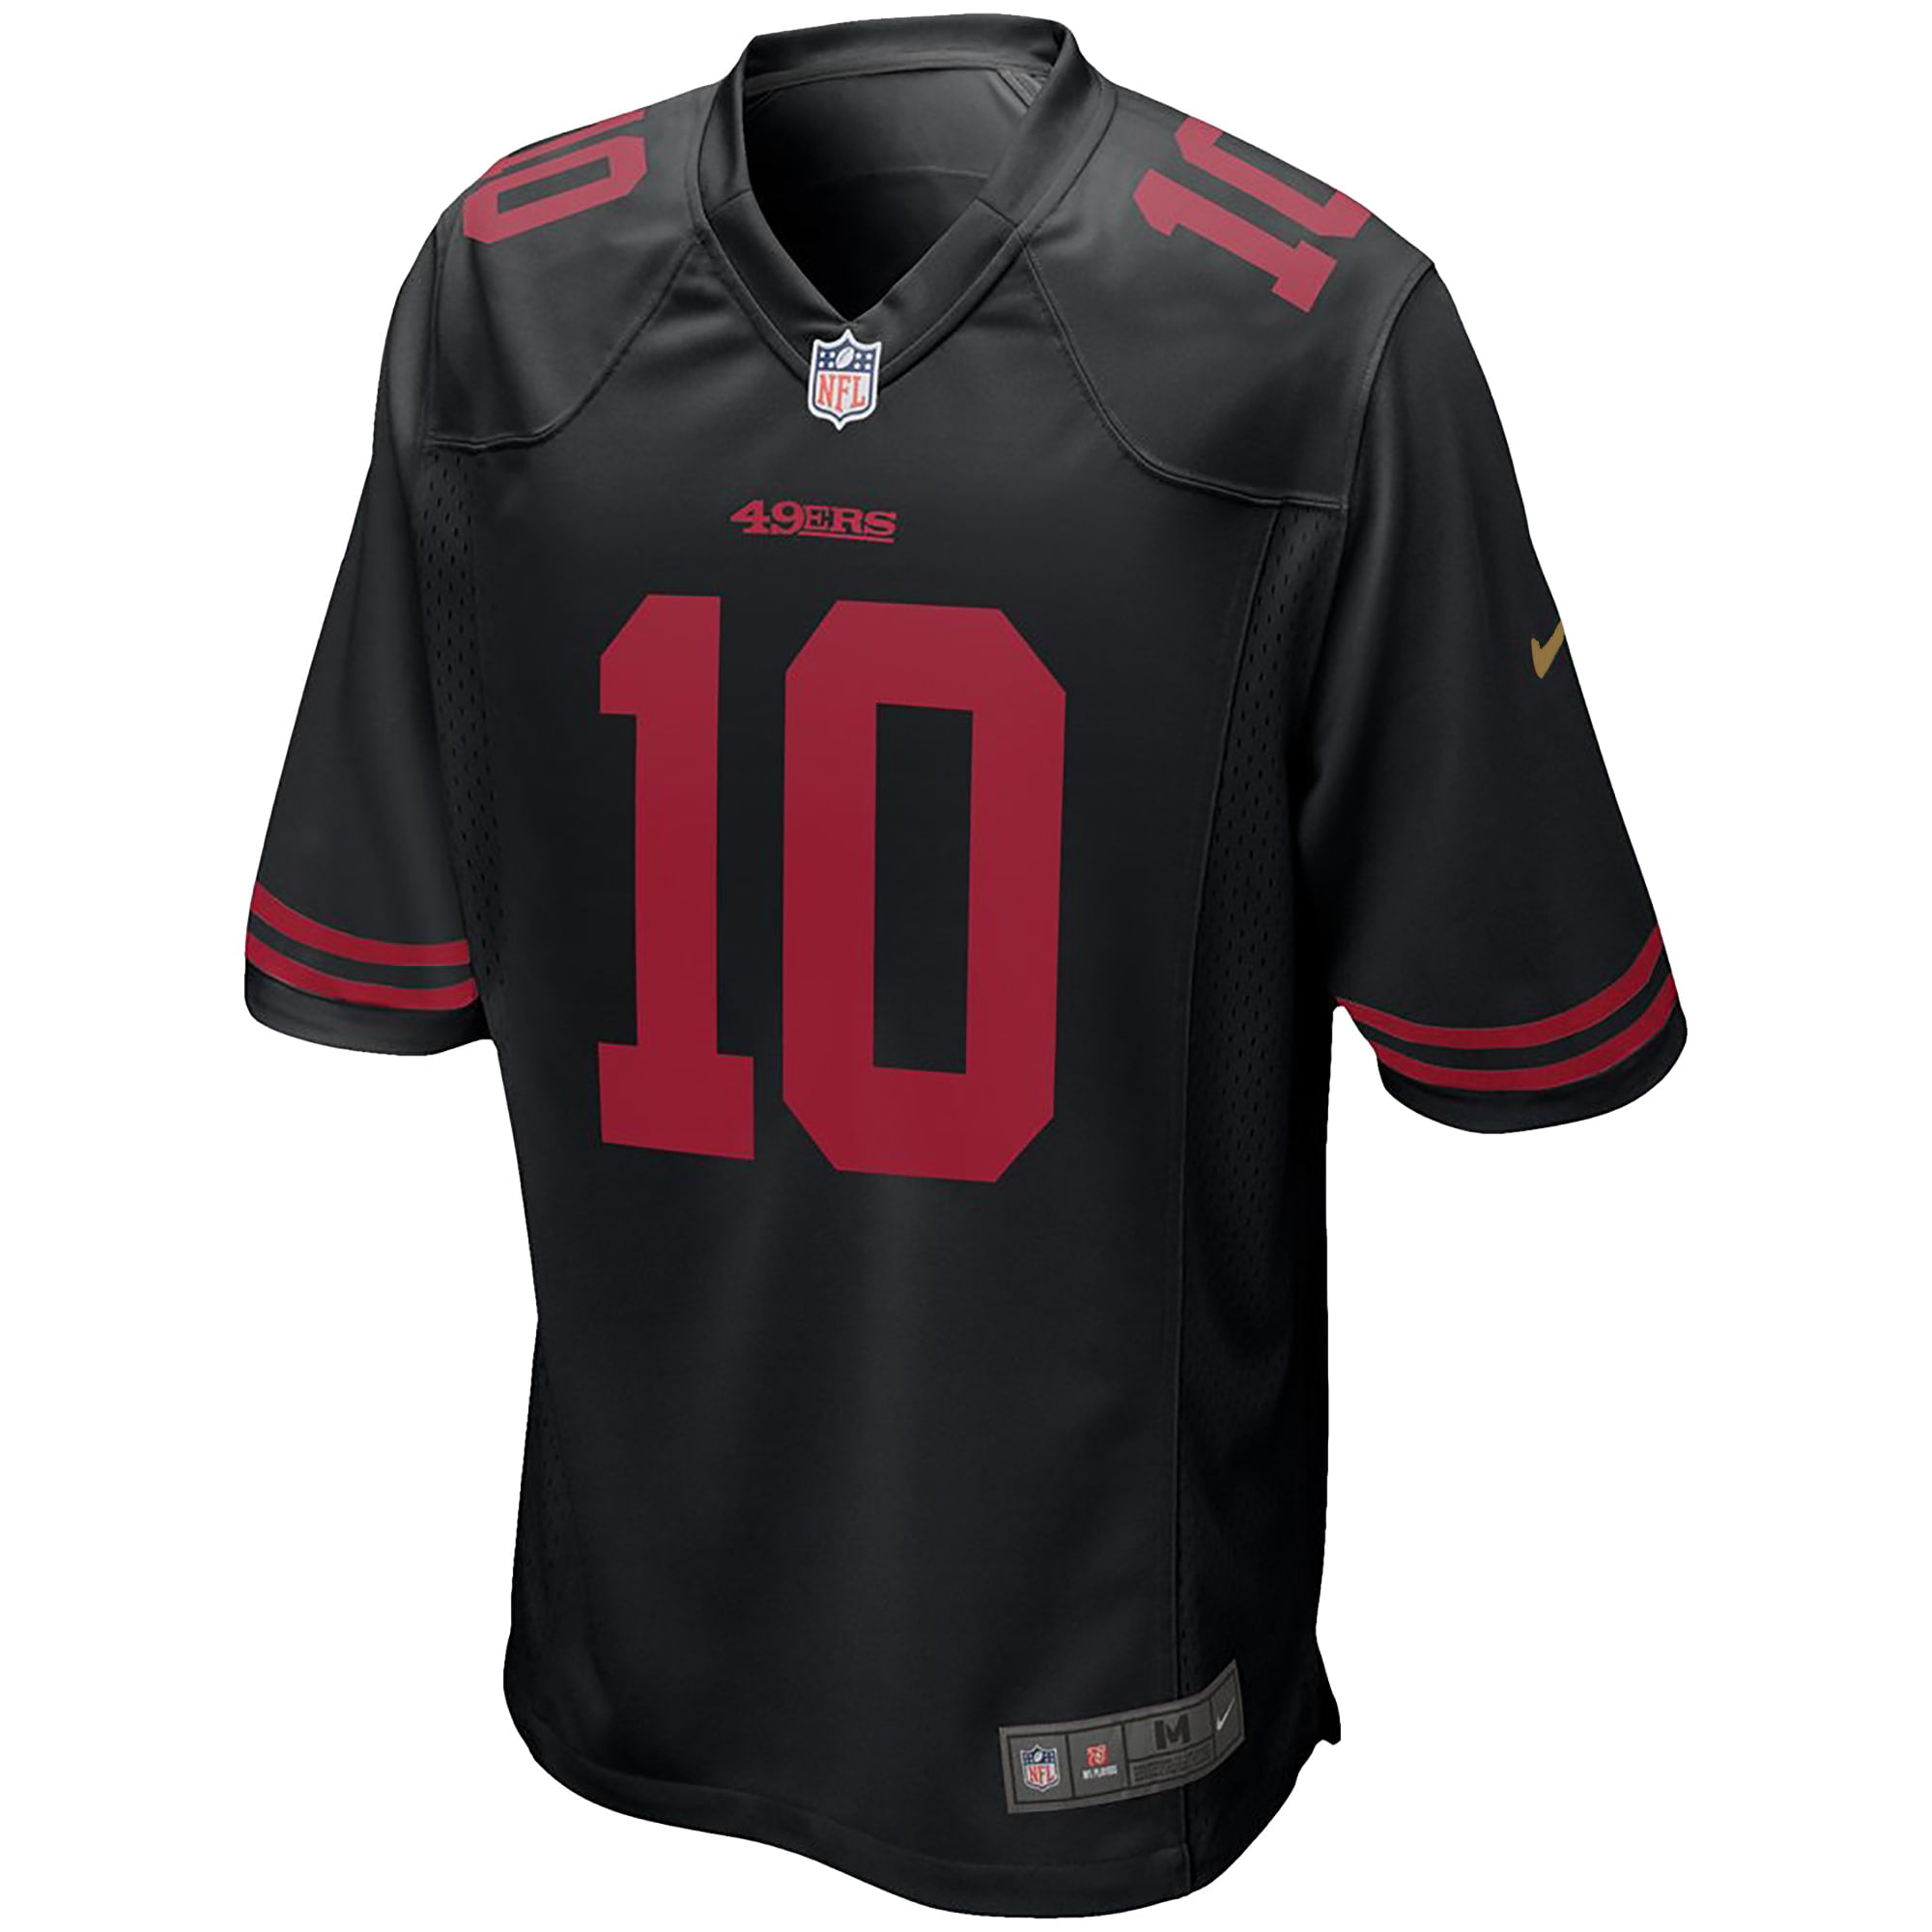 5t 49ers jersey